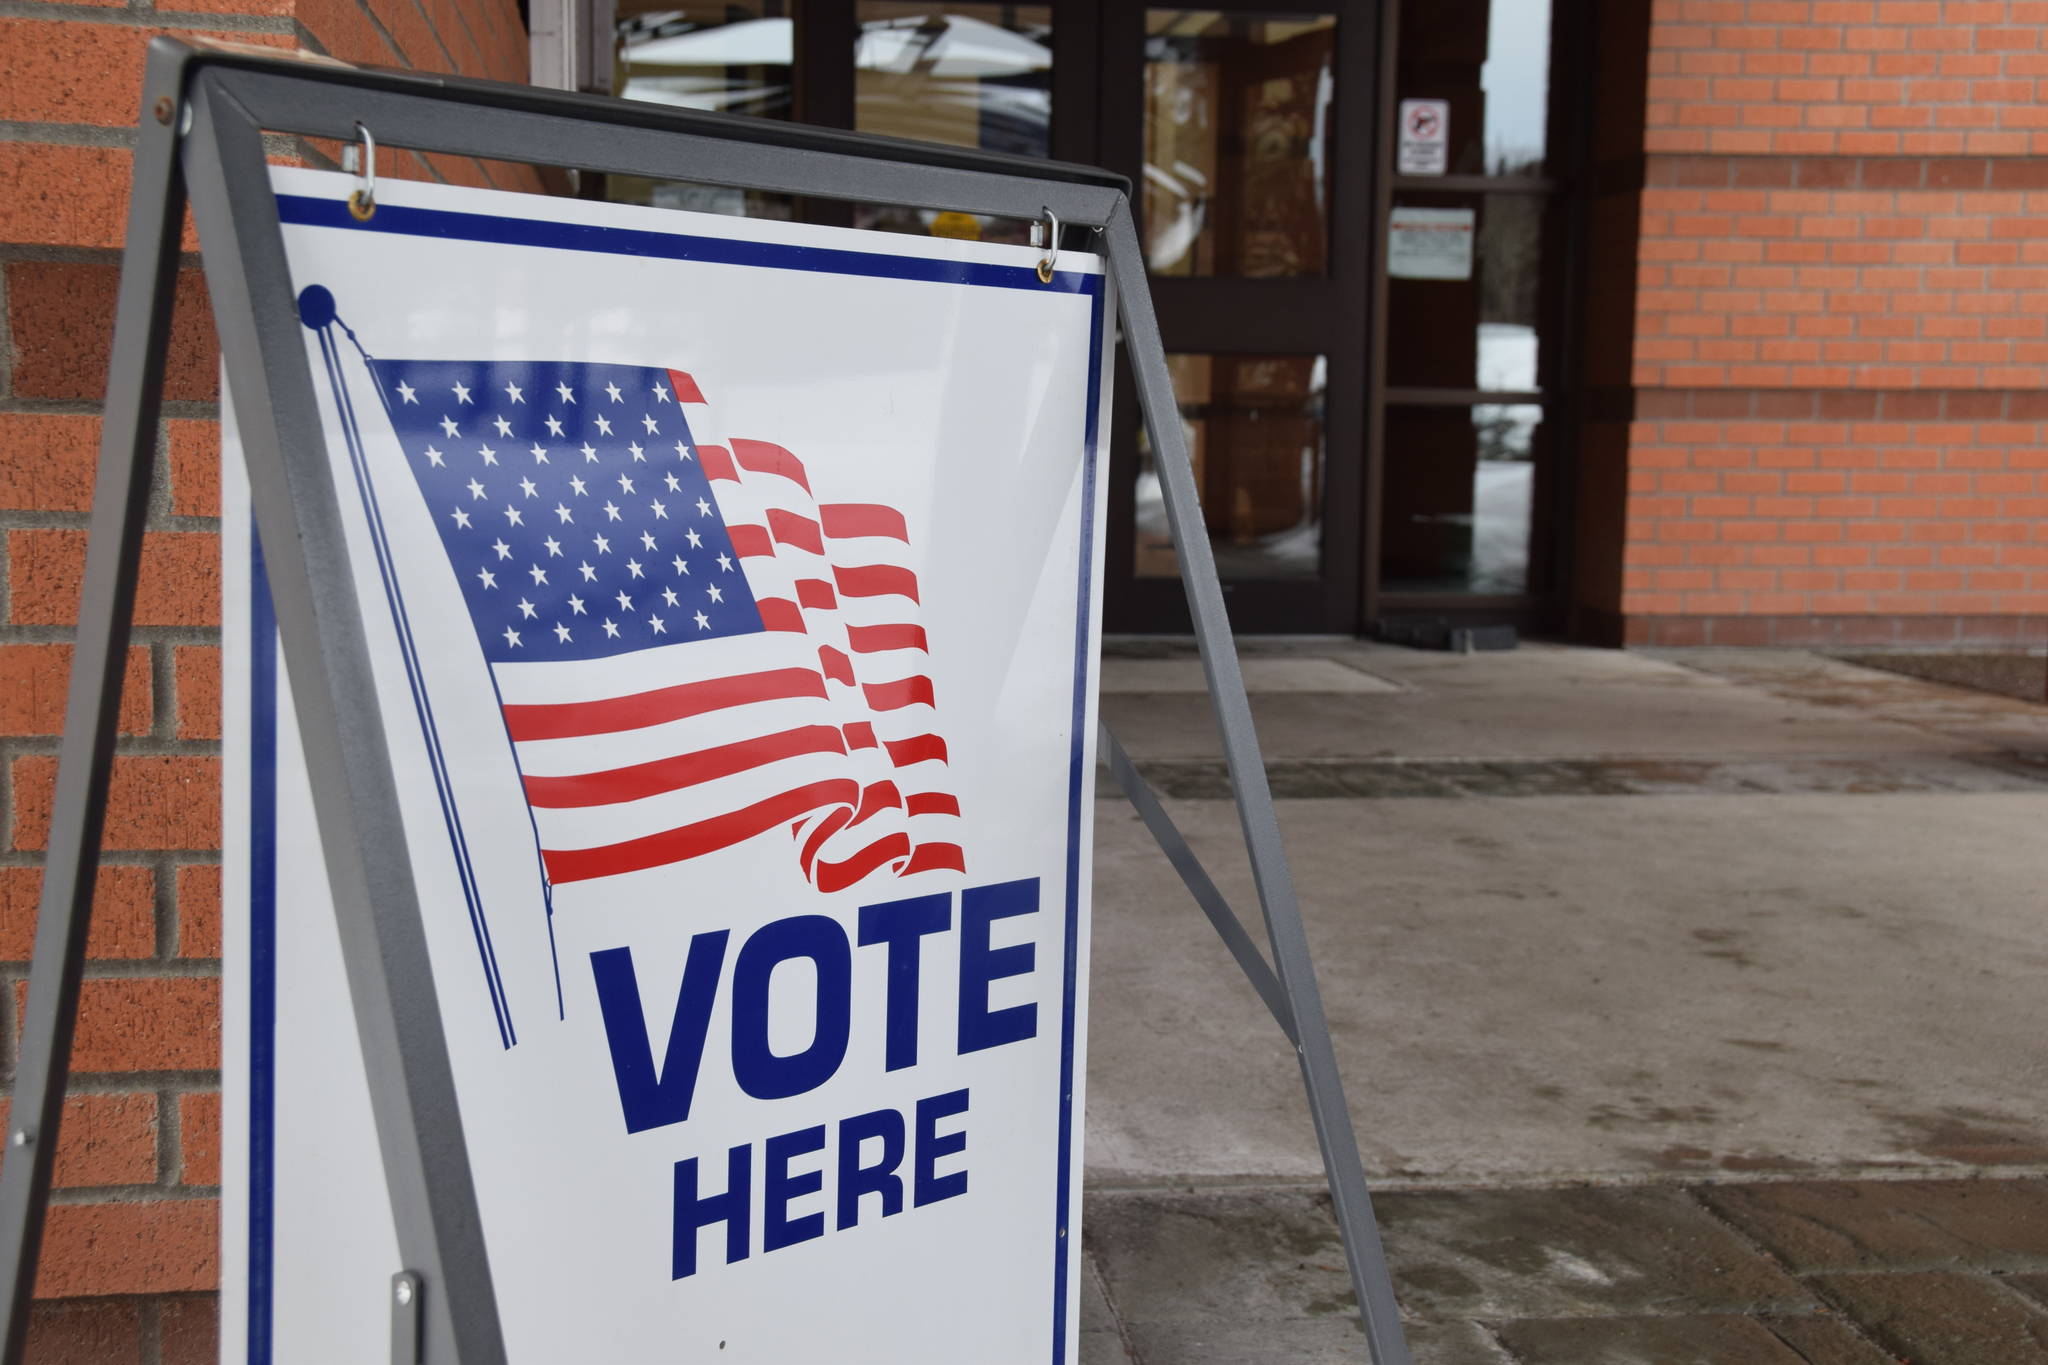 A sign directs voters at Soldotna City Hall during the special Field House election on March 5, 2019. (Photo by Brian Mazurek/Peninsula Clarion)                                A sign directs voters at Soldotna City Hall during the special Field House election on March 5, 2019. (Photo by Brian Mazurek/Peninsula Clarion)